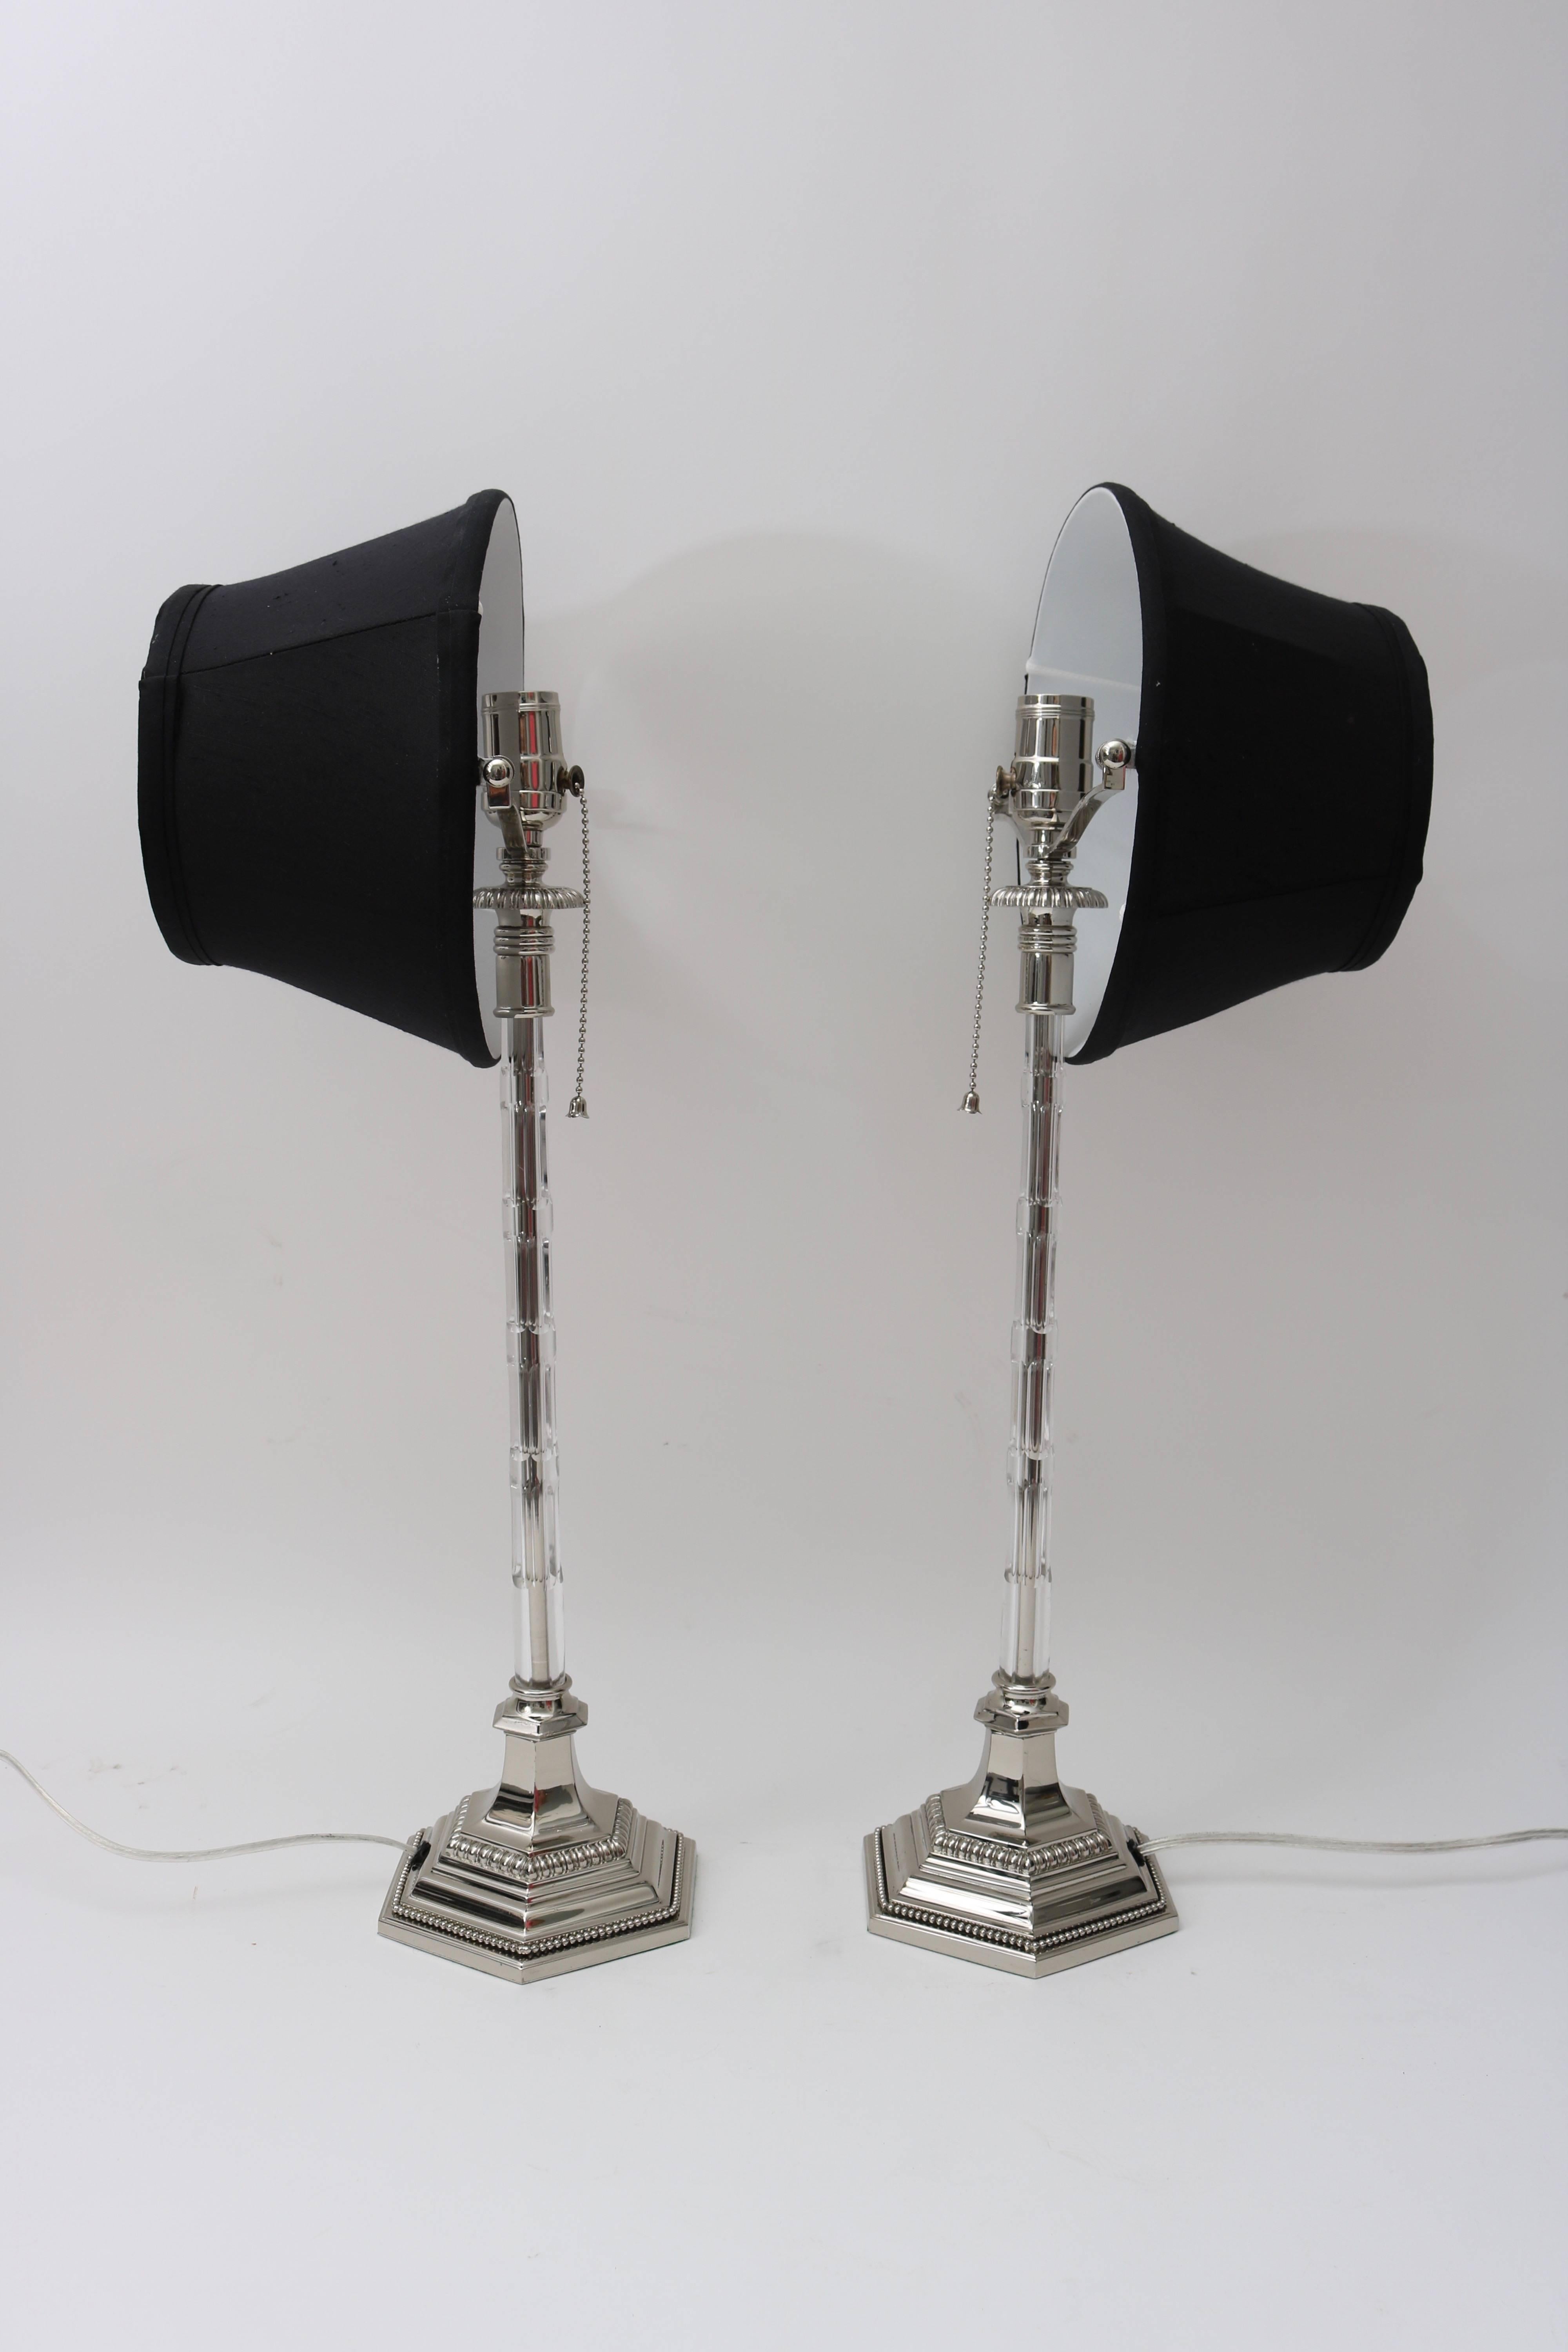 American Pair of Art Deco Vanity Table Lamps, Nickle Plate and Cut Crystal, Black Shade